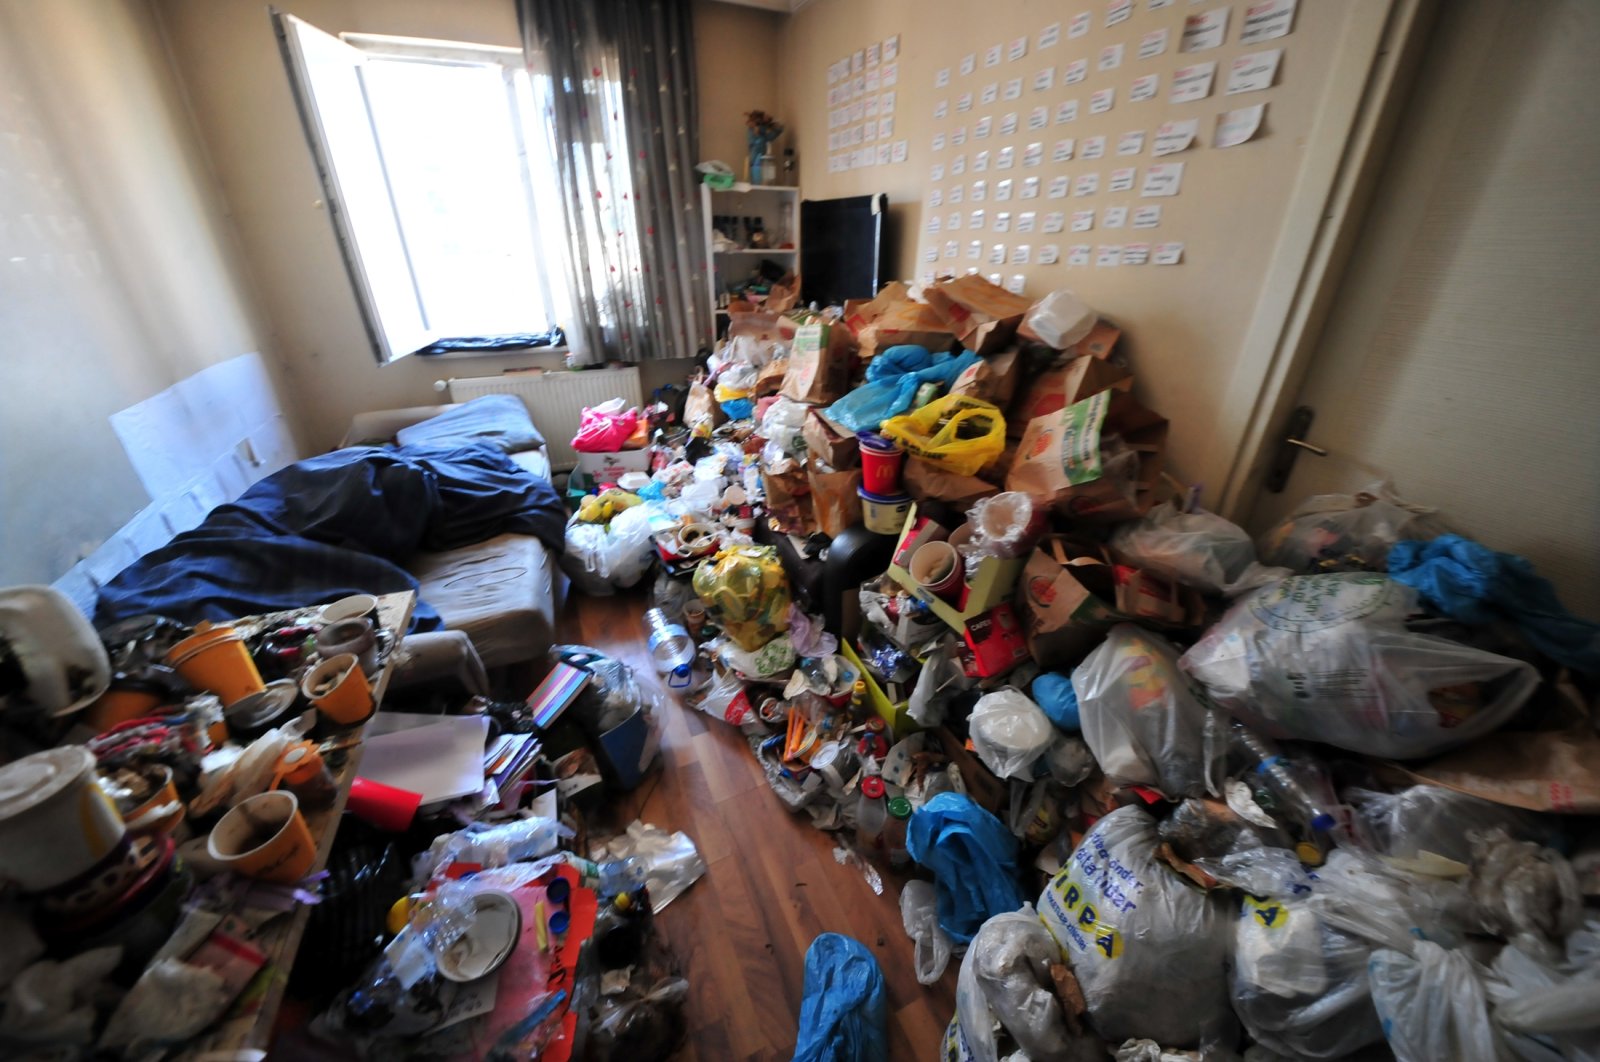 The hoarder&#039;s house is cluttered with garbage, Bursa, Turkey, July 25, 2022. (DHA Photo)